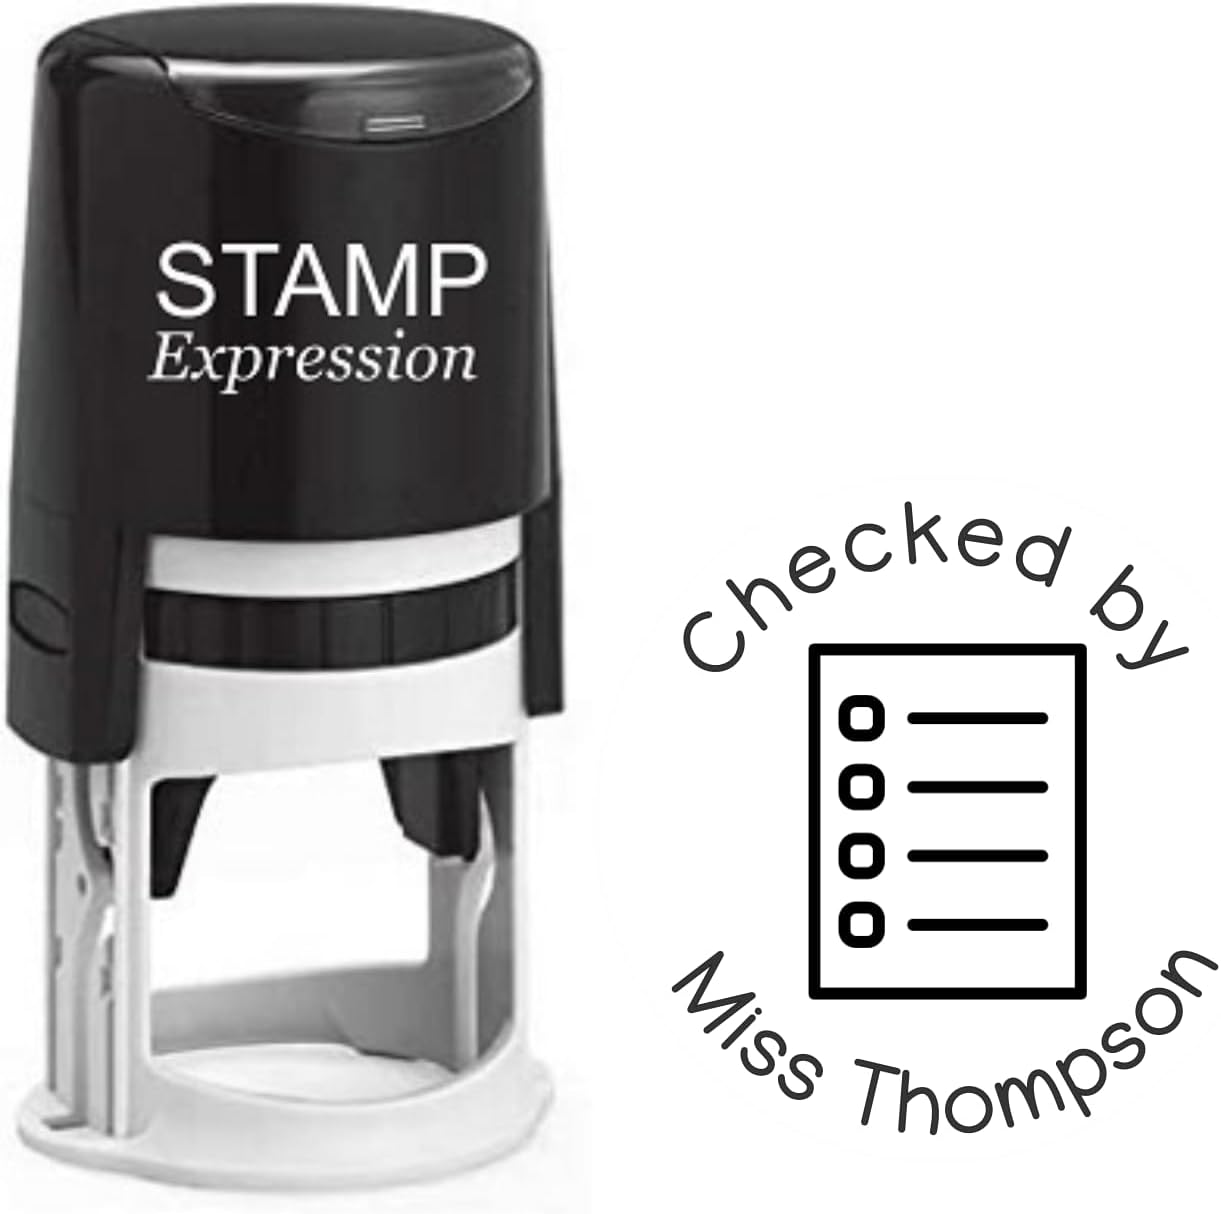 Checked by Teacher Custom Stamp - Self Inking. Personalized Rubber Stamp with Lines of Text (SH-76223)